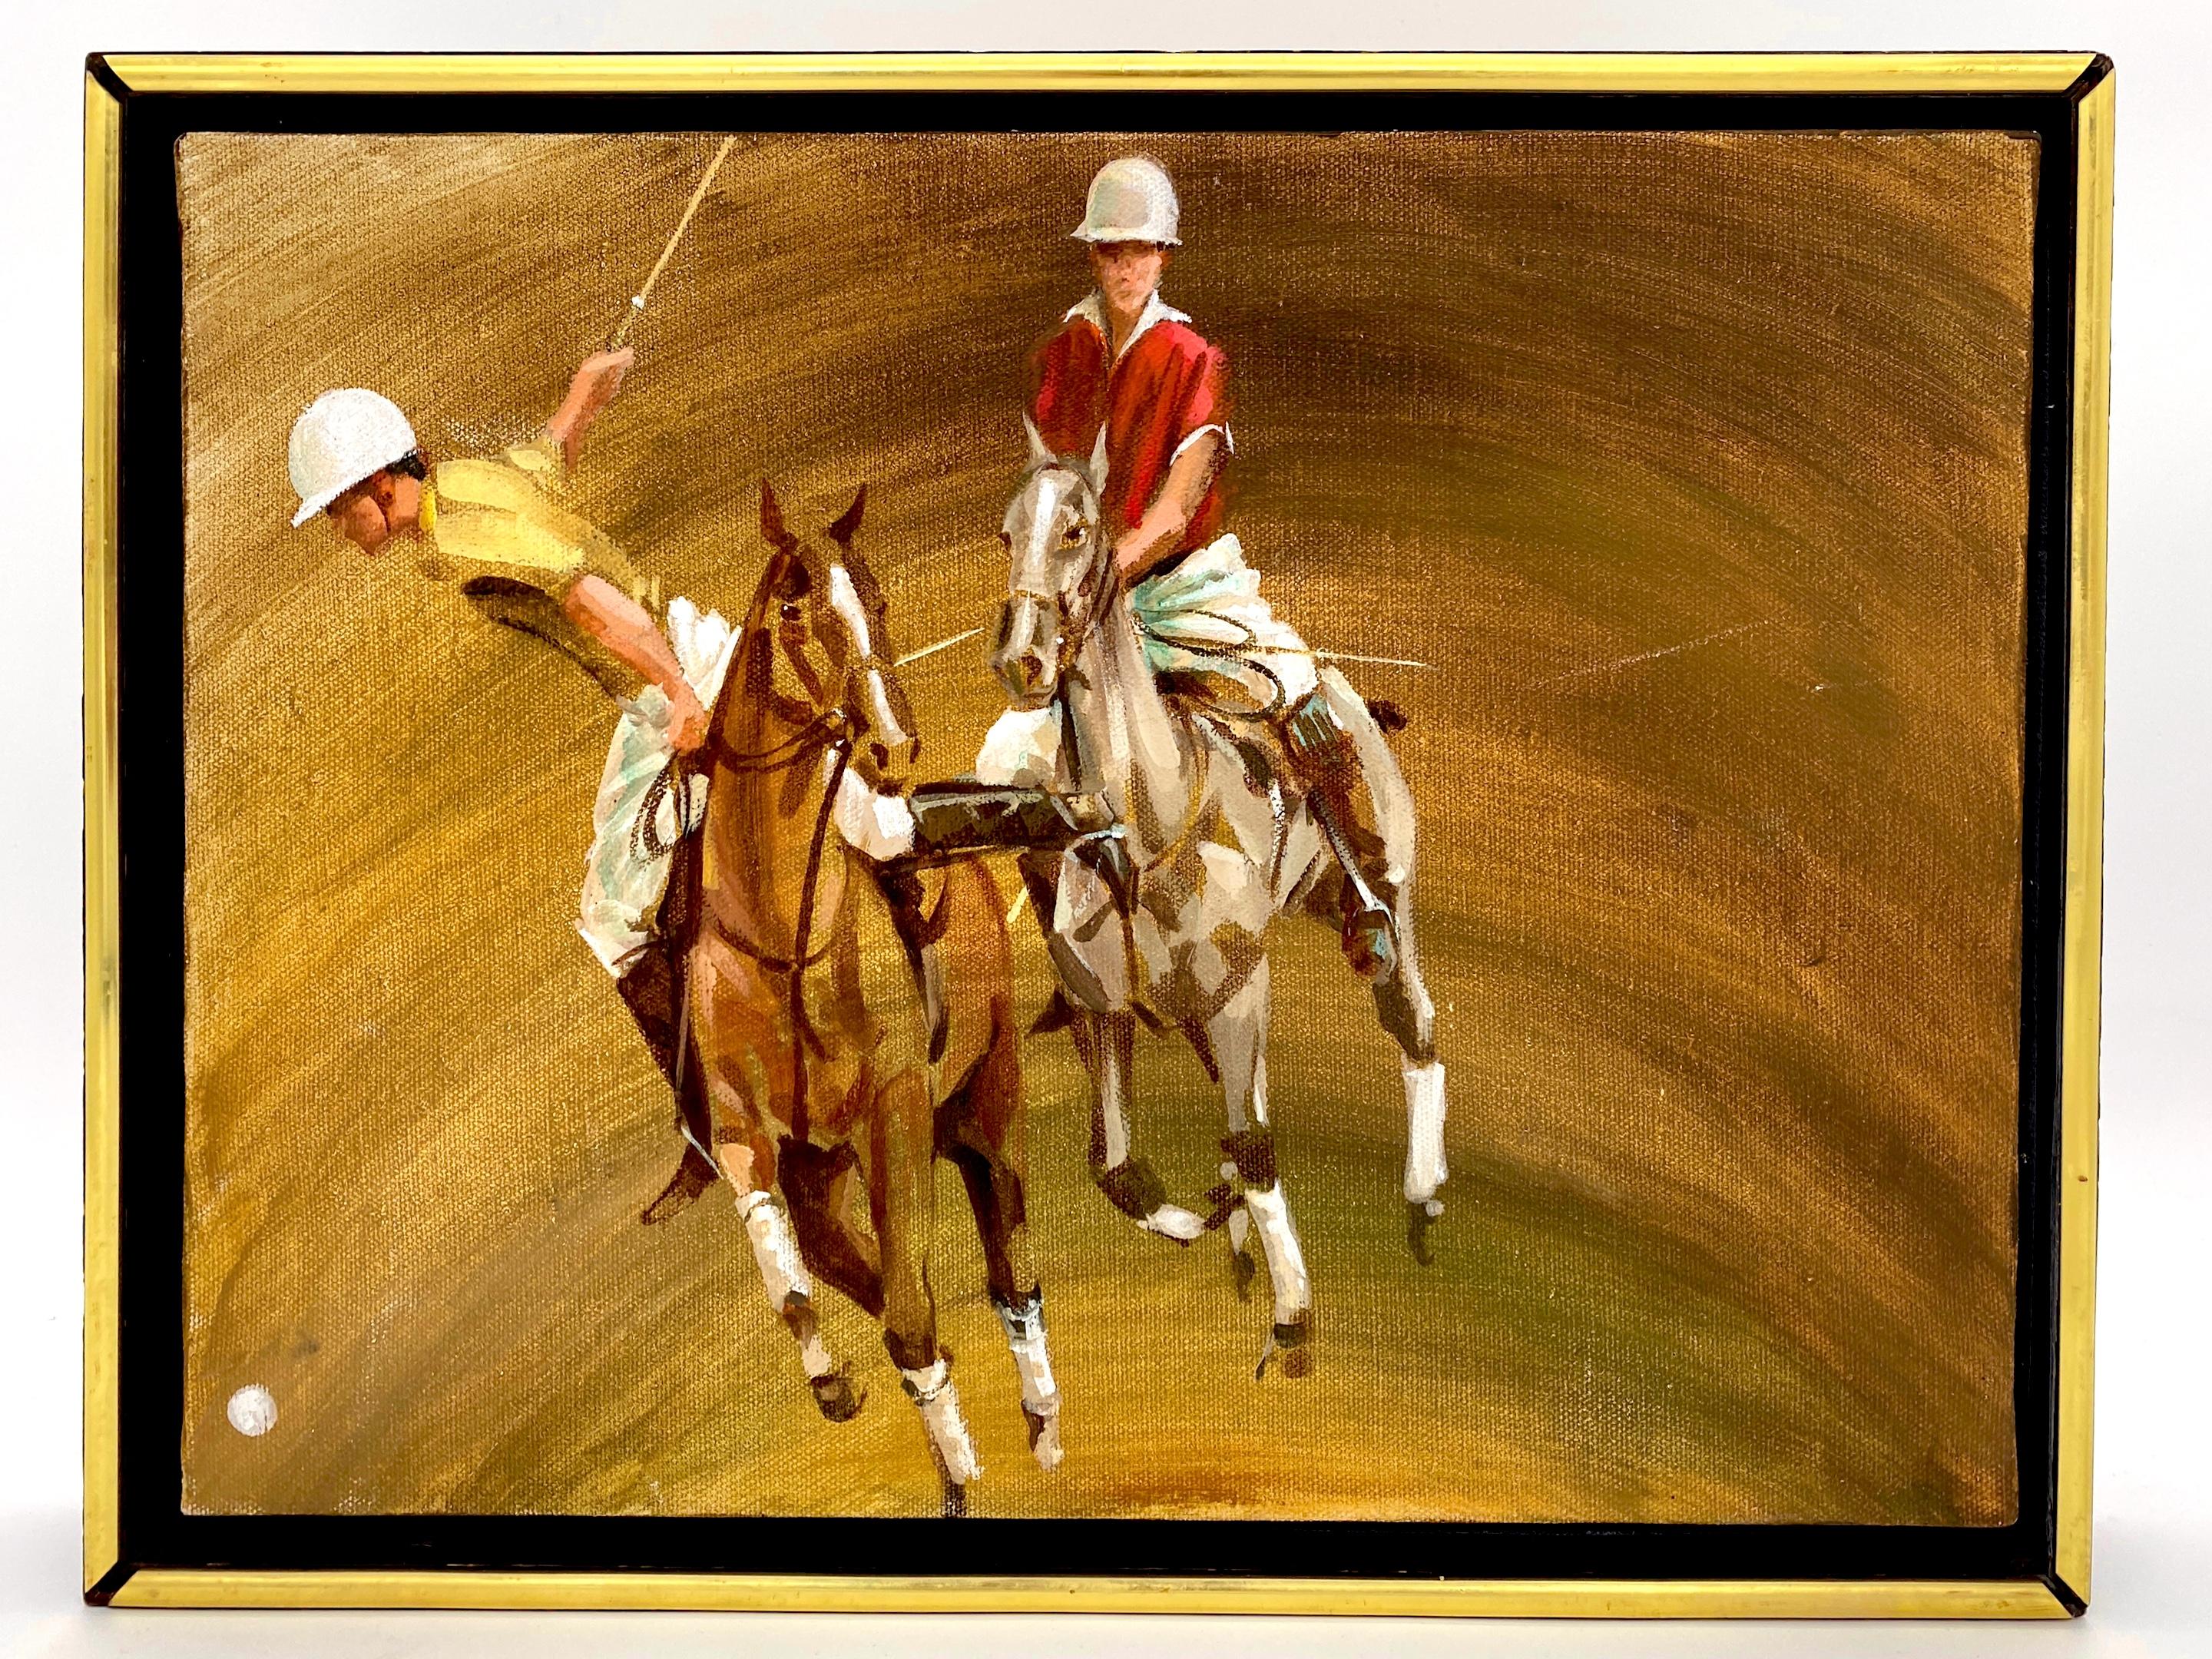 Vintage Unsigned American School Polo Painting, Unsigned, Circa 1970s 

Step into the nostalgic ambiance of the 1970s American School of painters with this vintage Unsigned Polo Painting. This captivating artwork provides a realistic snapshot of a